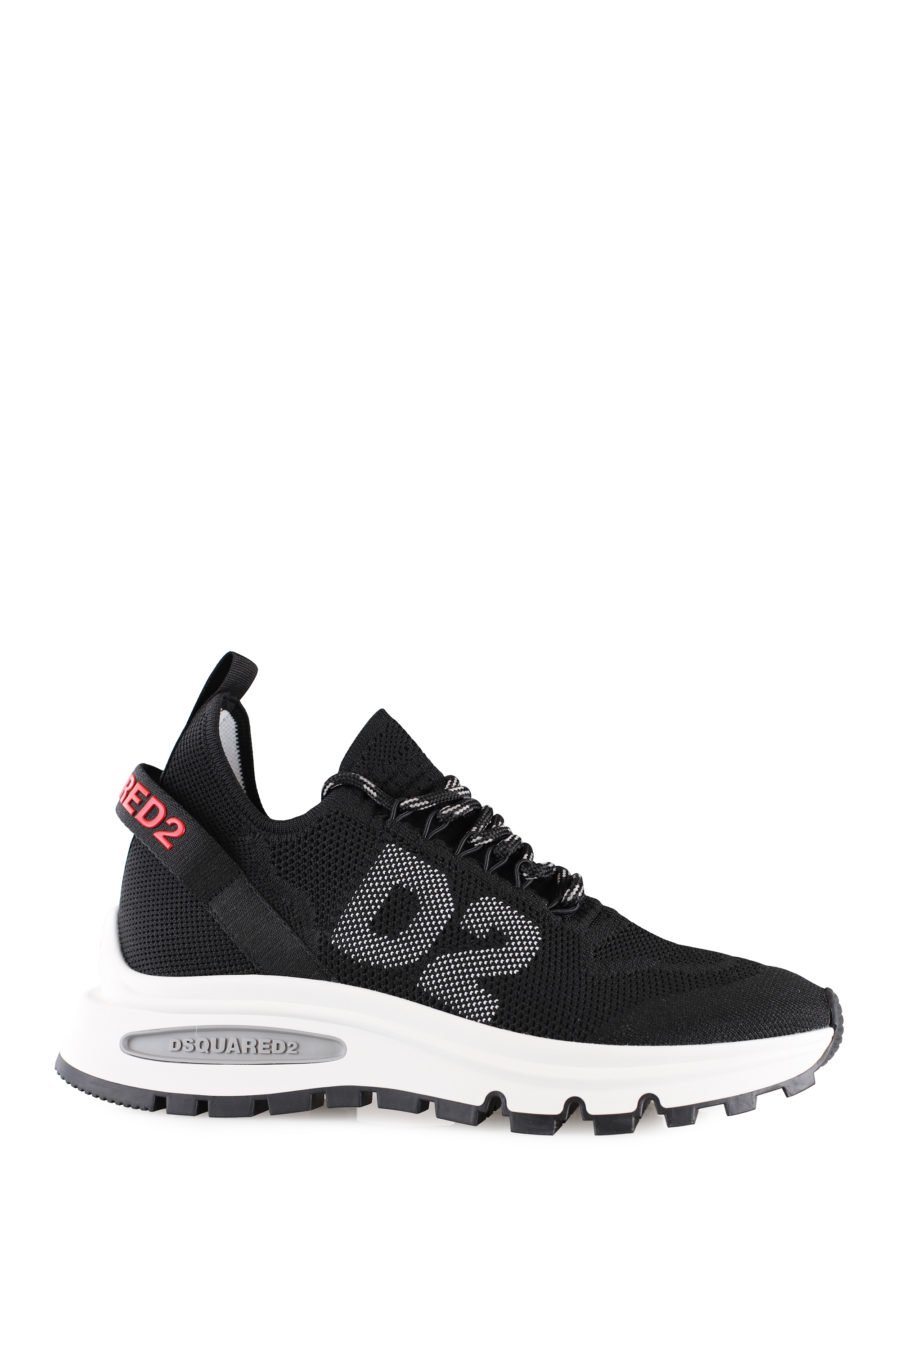 Black trainers with small red logo and "D2" - IMG 0005